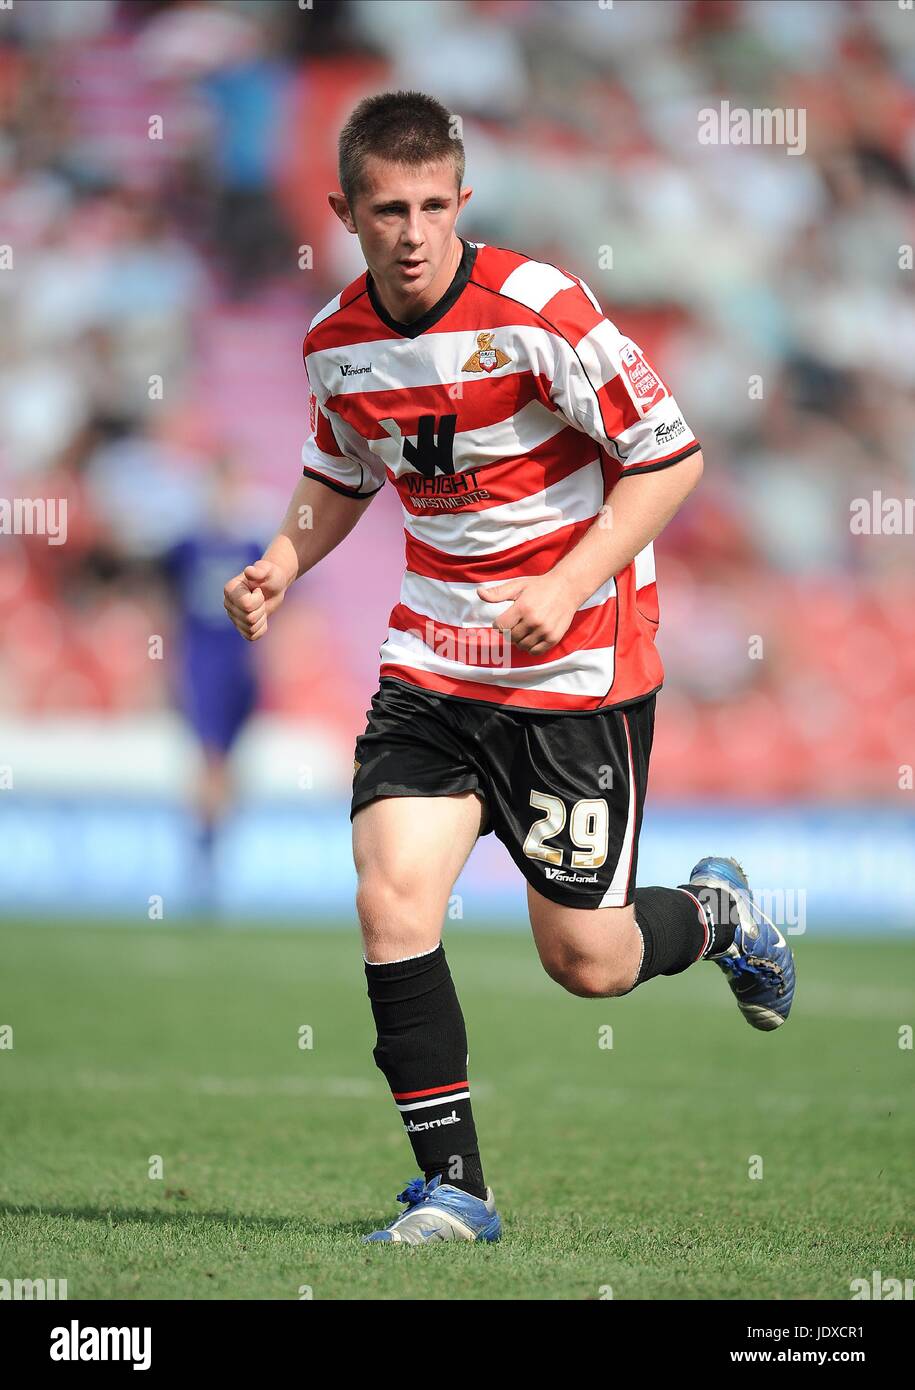 WAIDE FAIRHURST DONCASTER ROVERS FC KEEPMOAT STADIUM DONCASTER ENGLAND 26 July 2008 Stock Photo